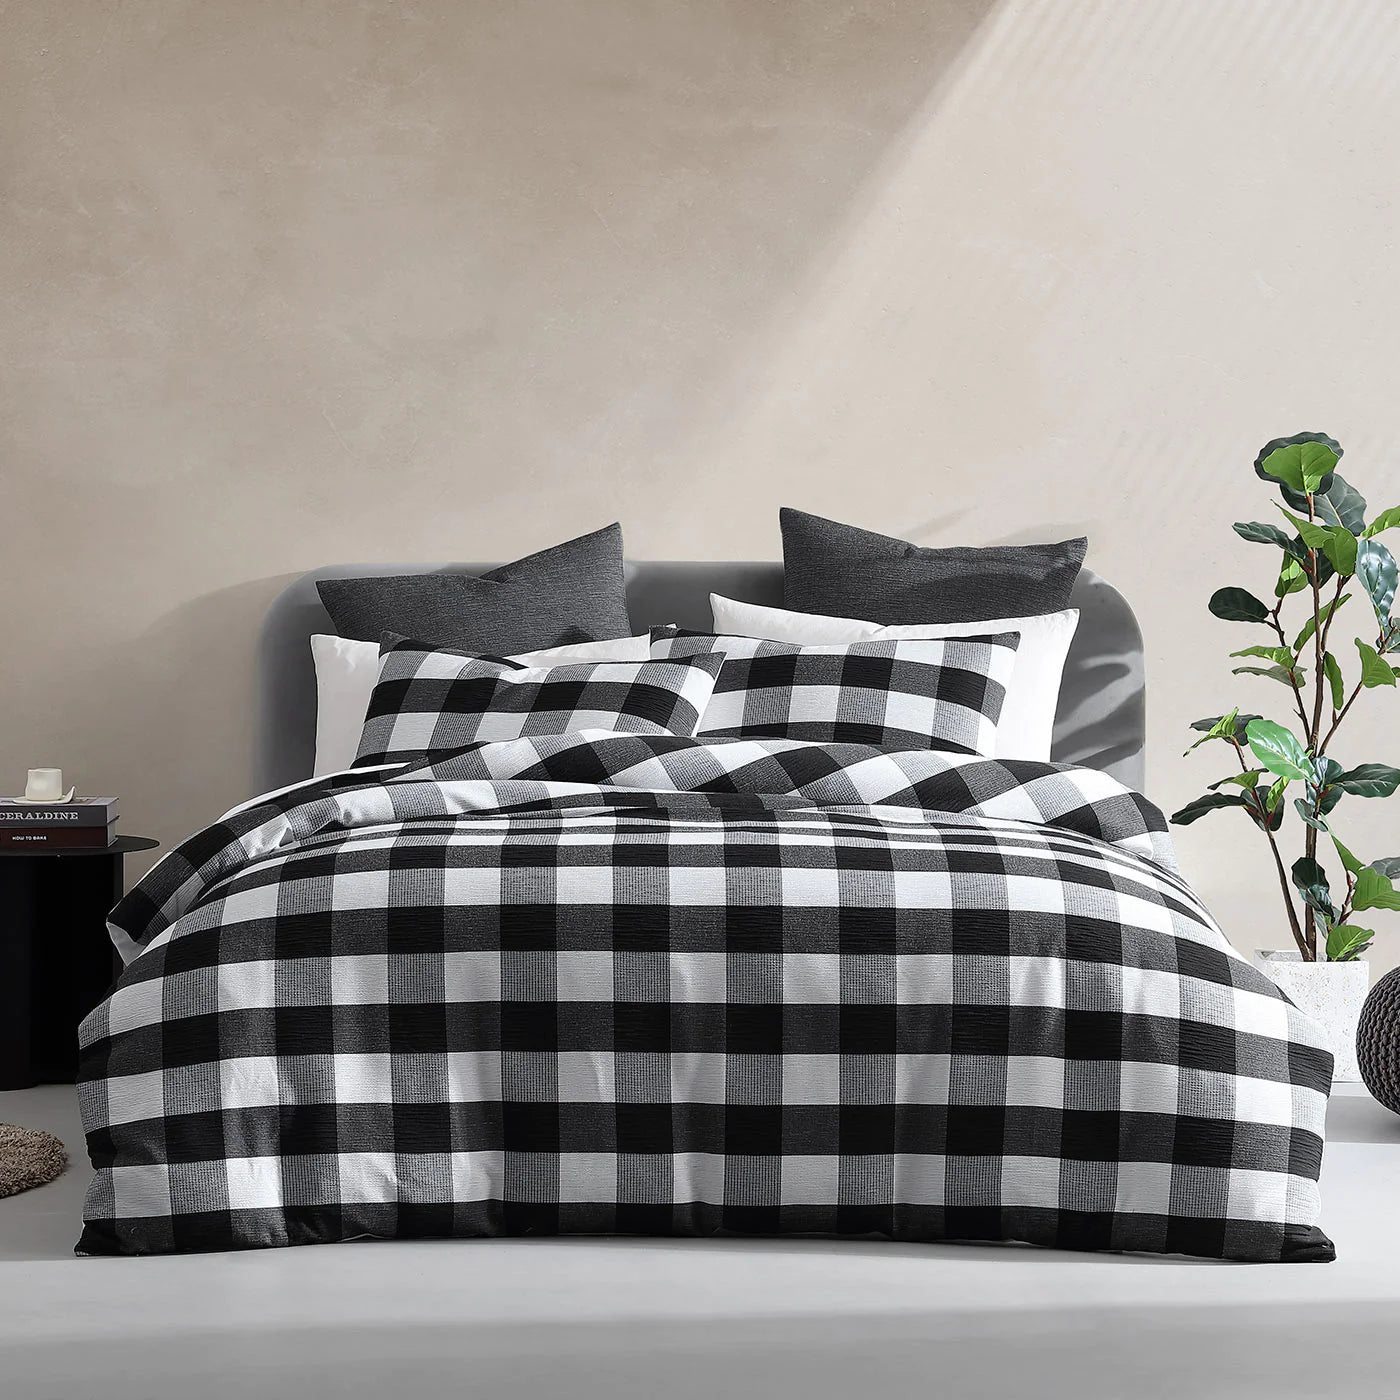 Hogan Slate is the perfect quilt cover set to create a comfortable bedroom atmosphere. Featuring a variety of textured squares in contrasting shades and patterns